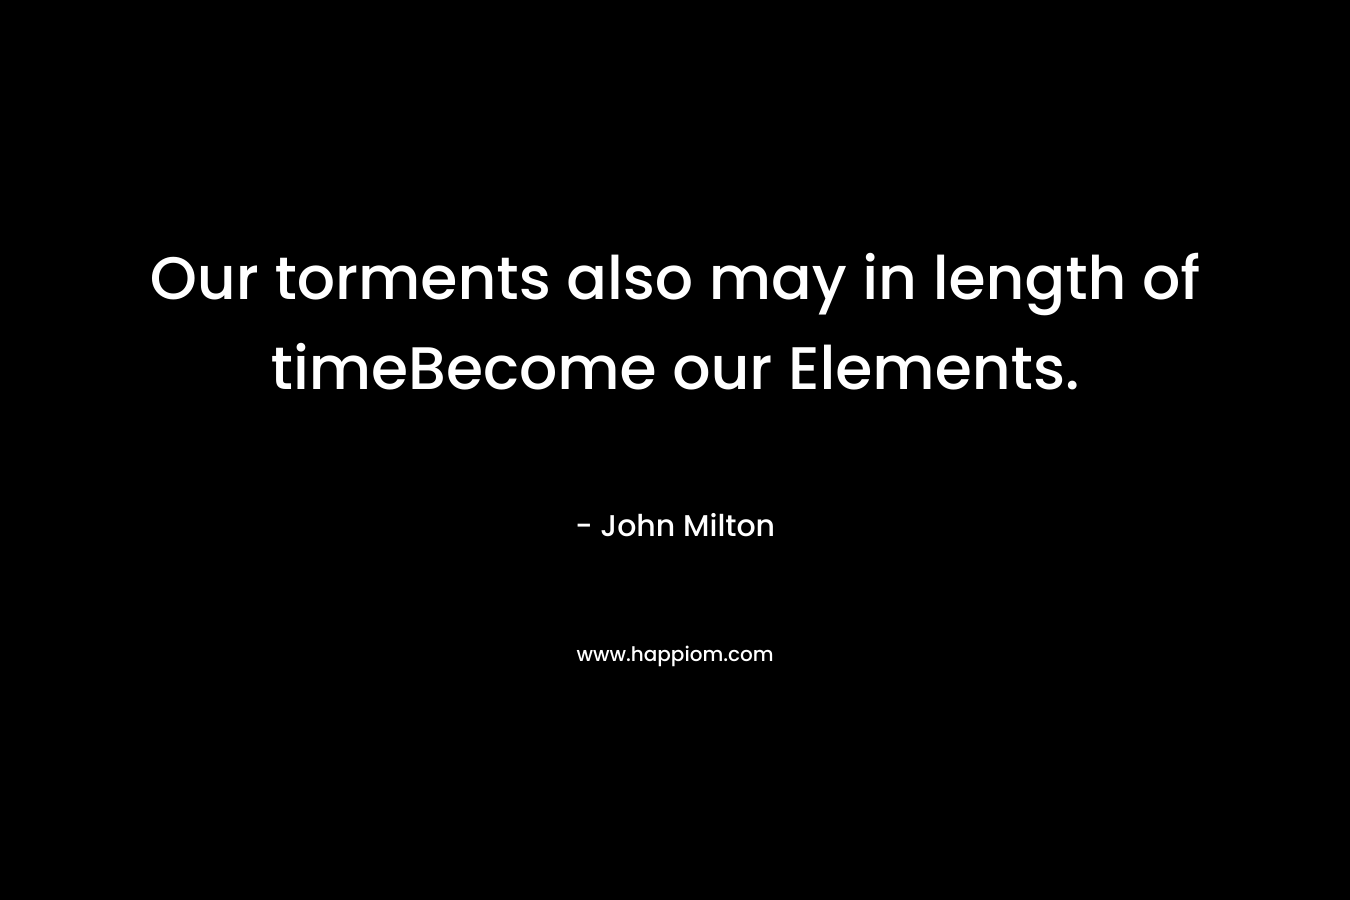 Our torments also may in length of timeBecome our Elements. – John Milton